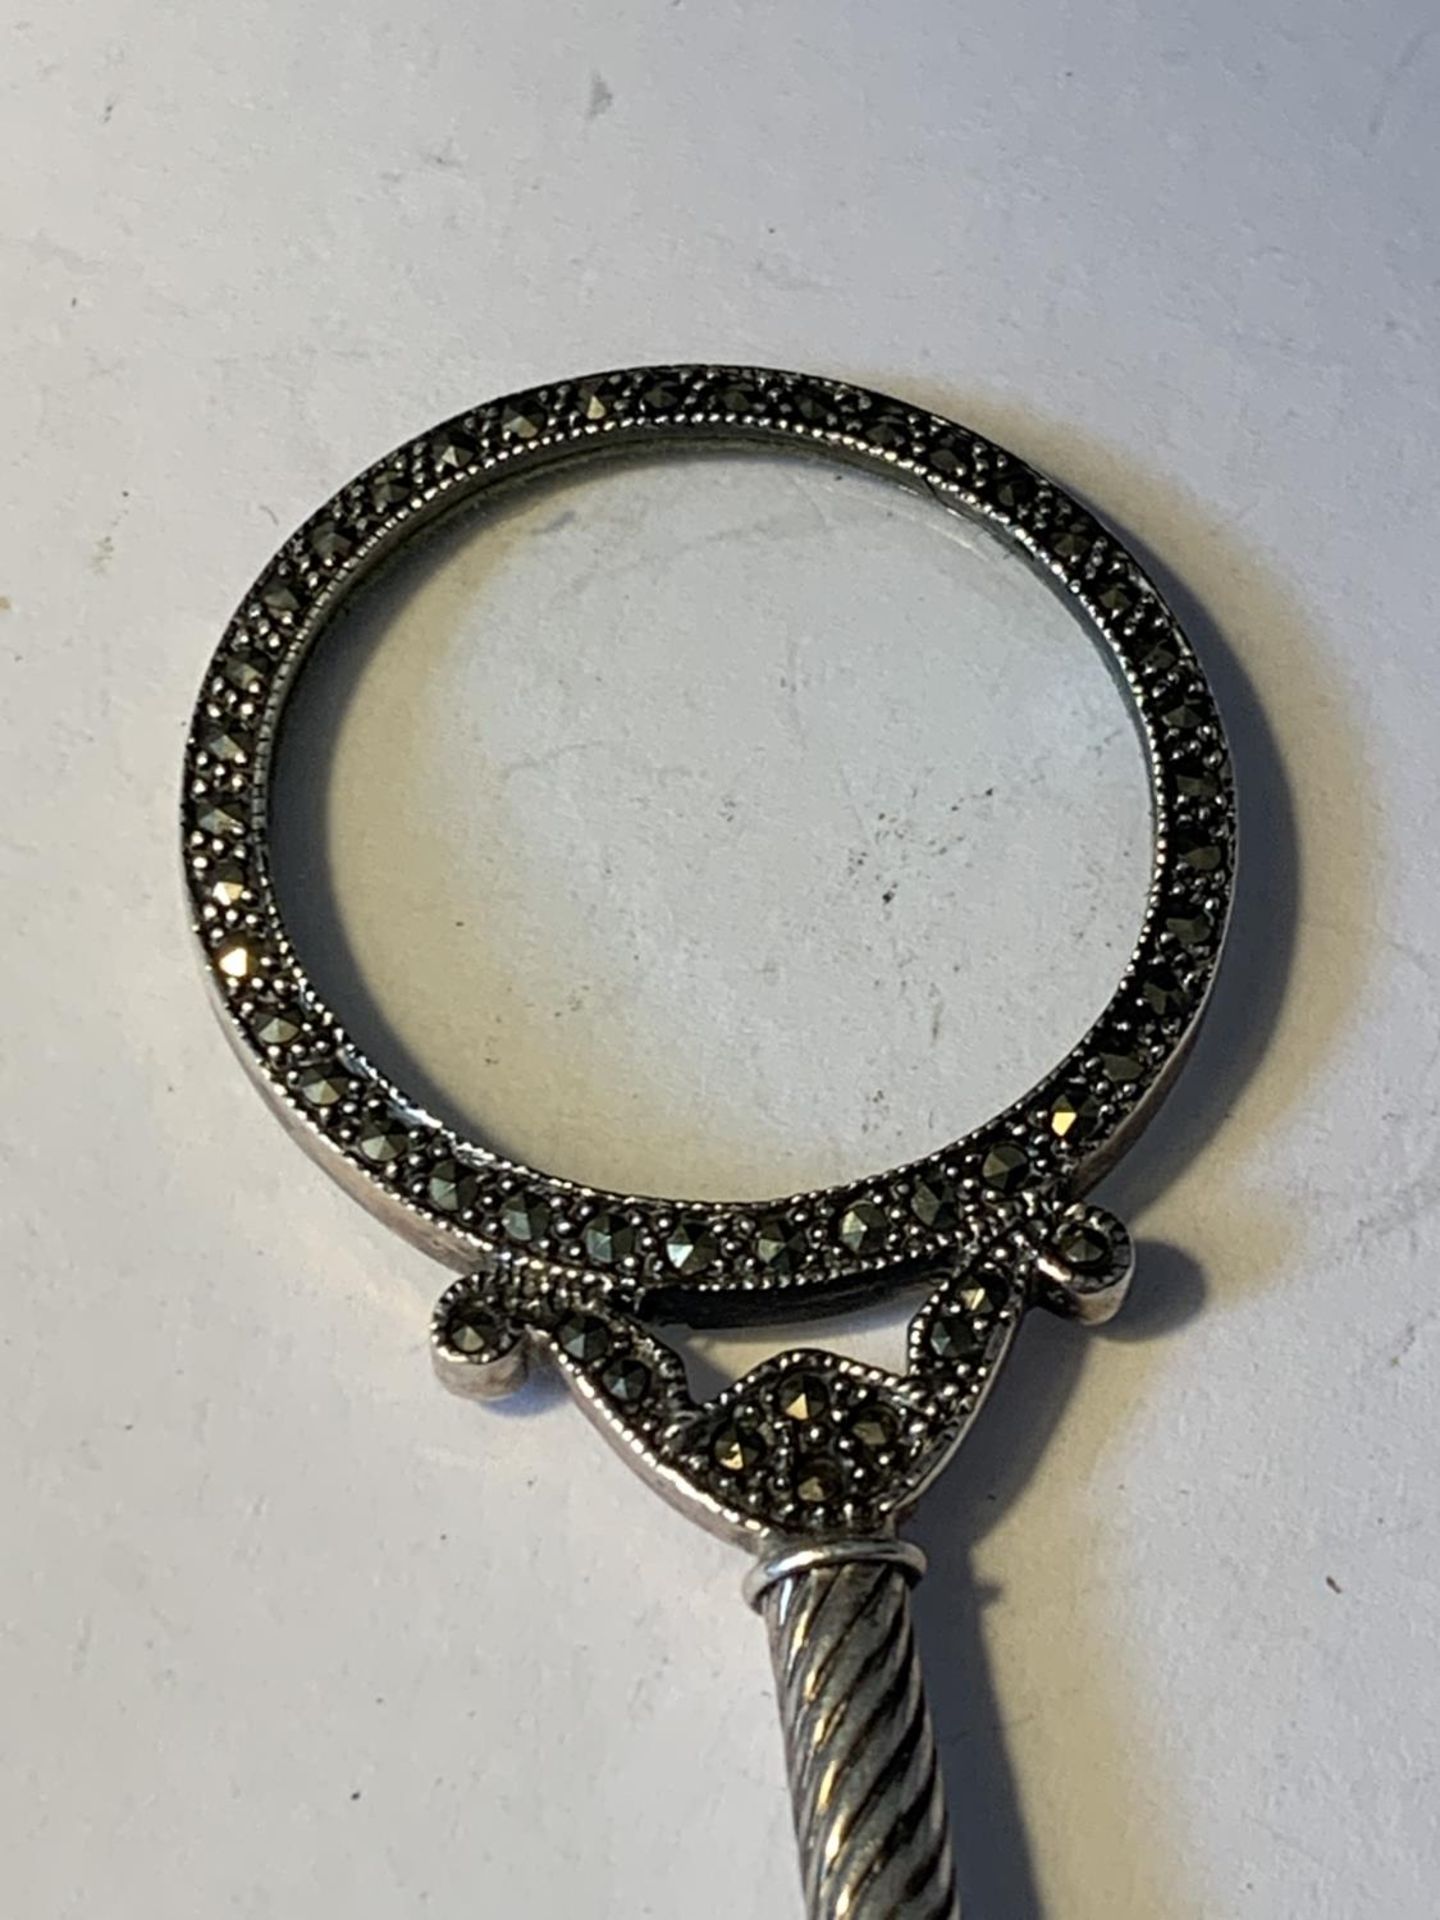 A MARKED 925 SILVER DECORATIVE MAGNIFYING GLASS - Image 2 of 4